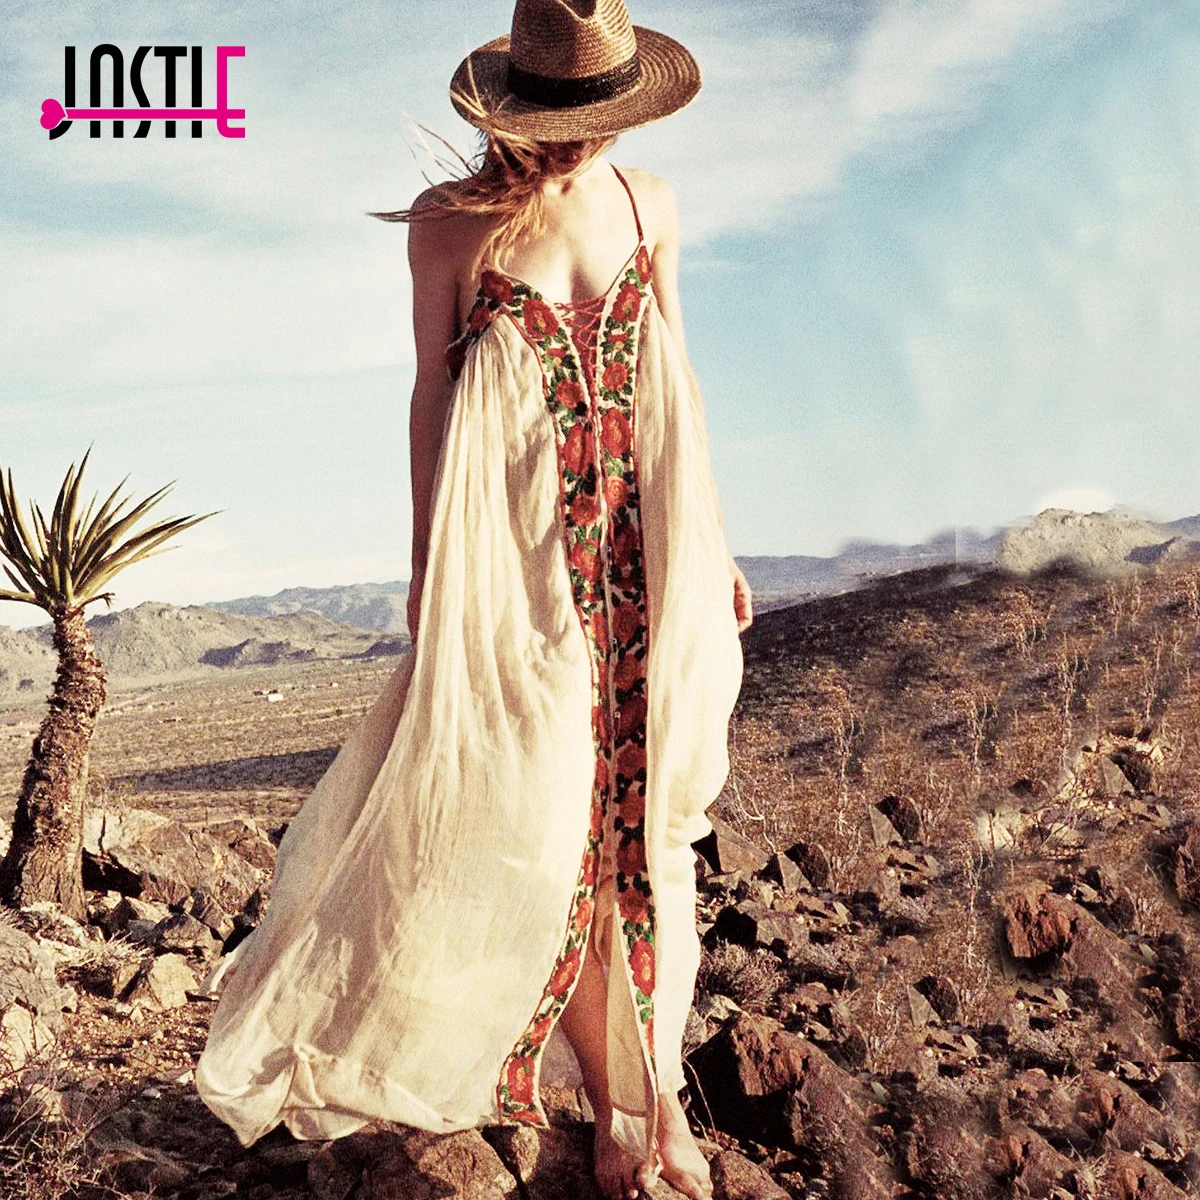 Jastie Free-Flowing Maxi Dress Floral Embroidery Boho Dress V-Neck Lace-Up Strapless Sexy Dresses Hippie Chic Women Vestido Robe